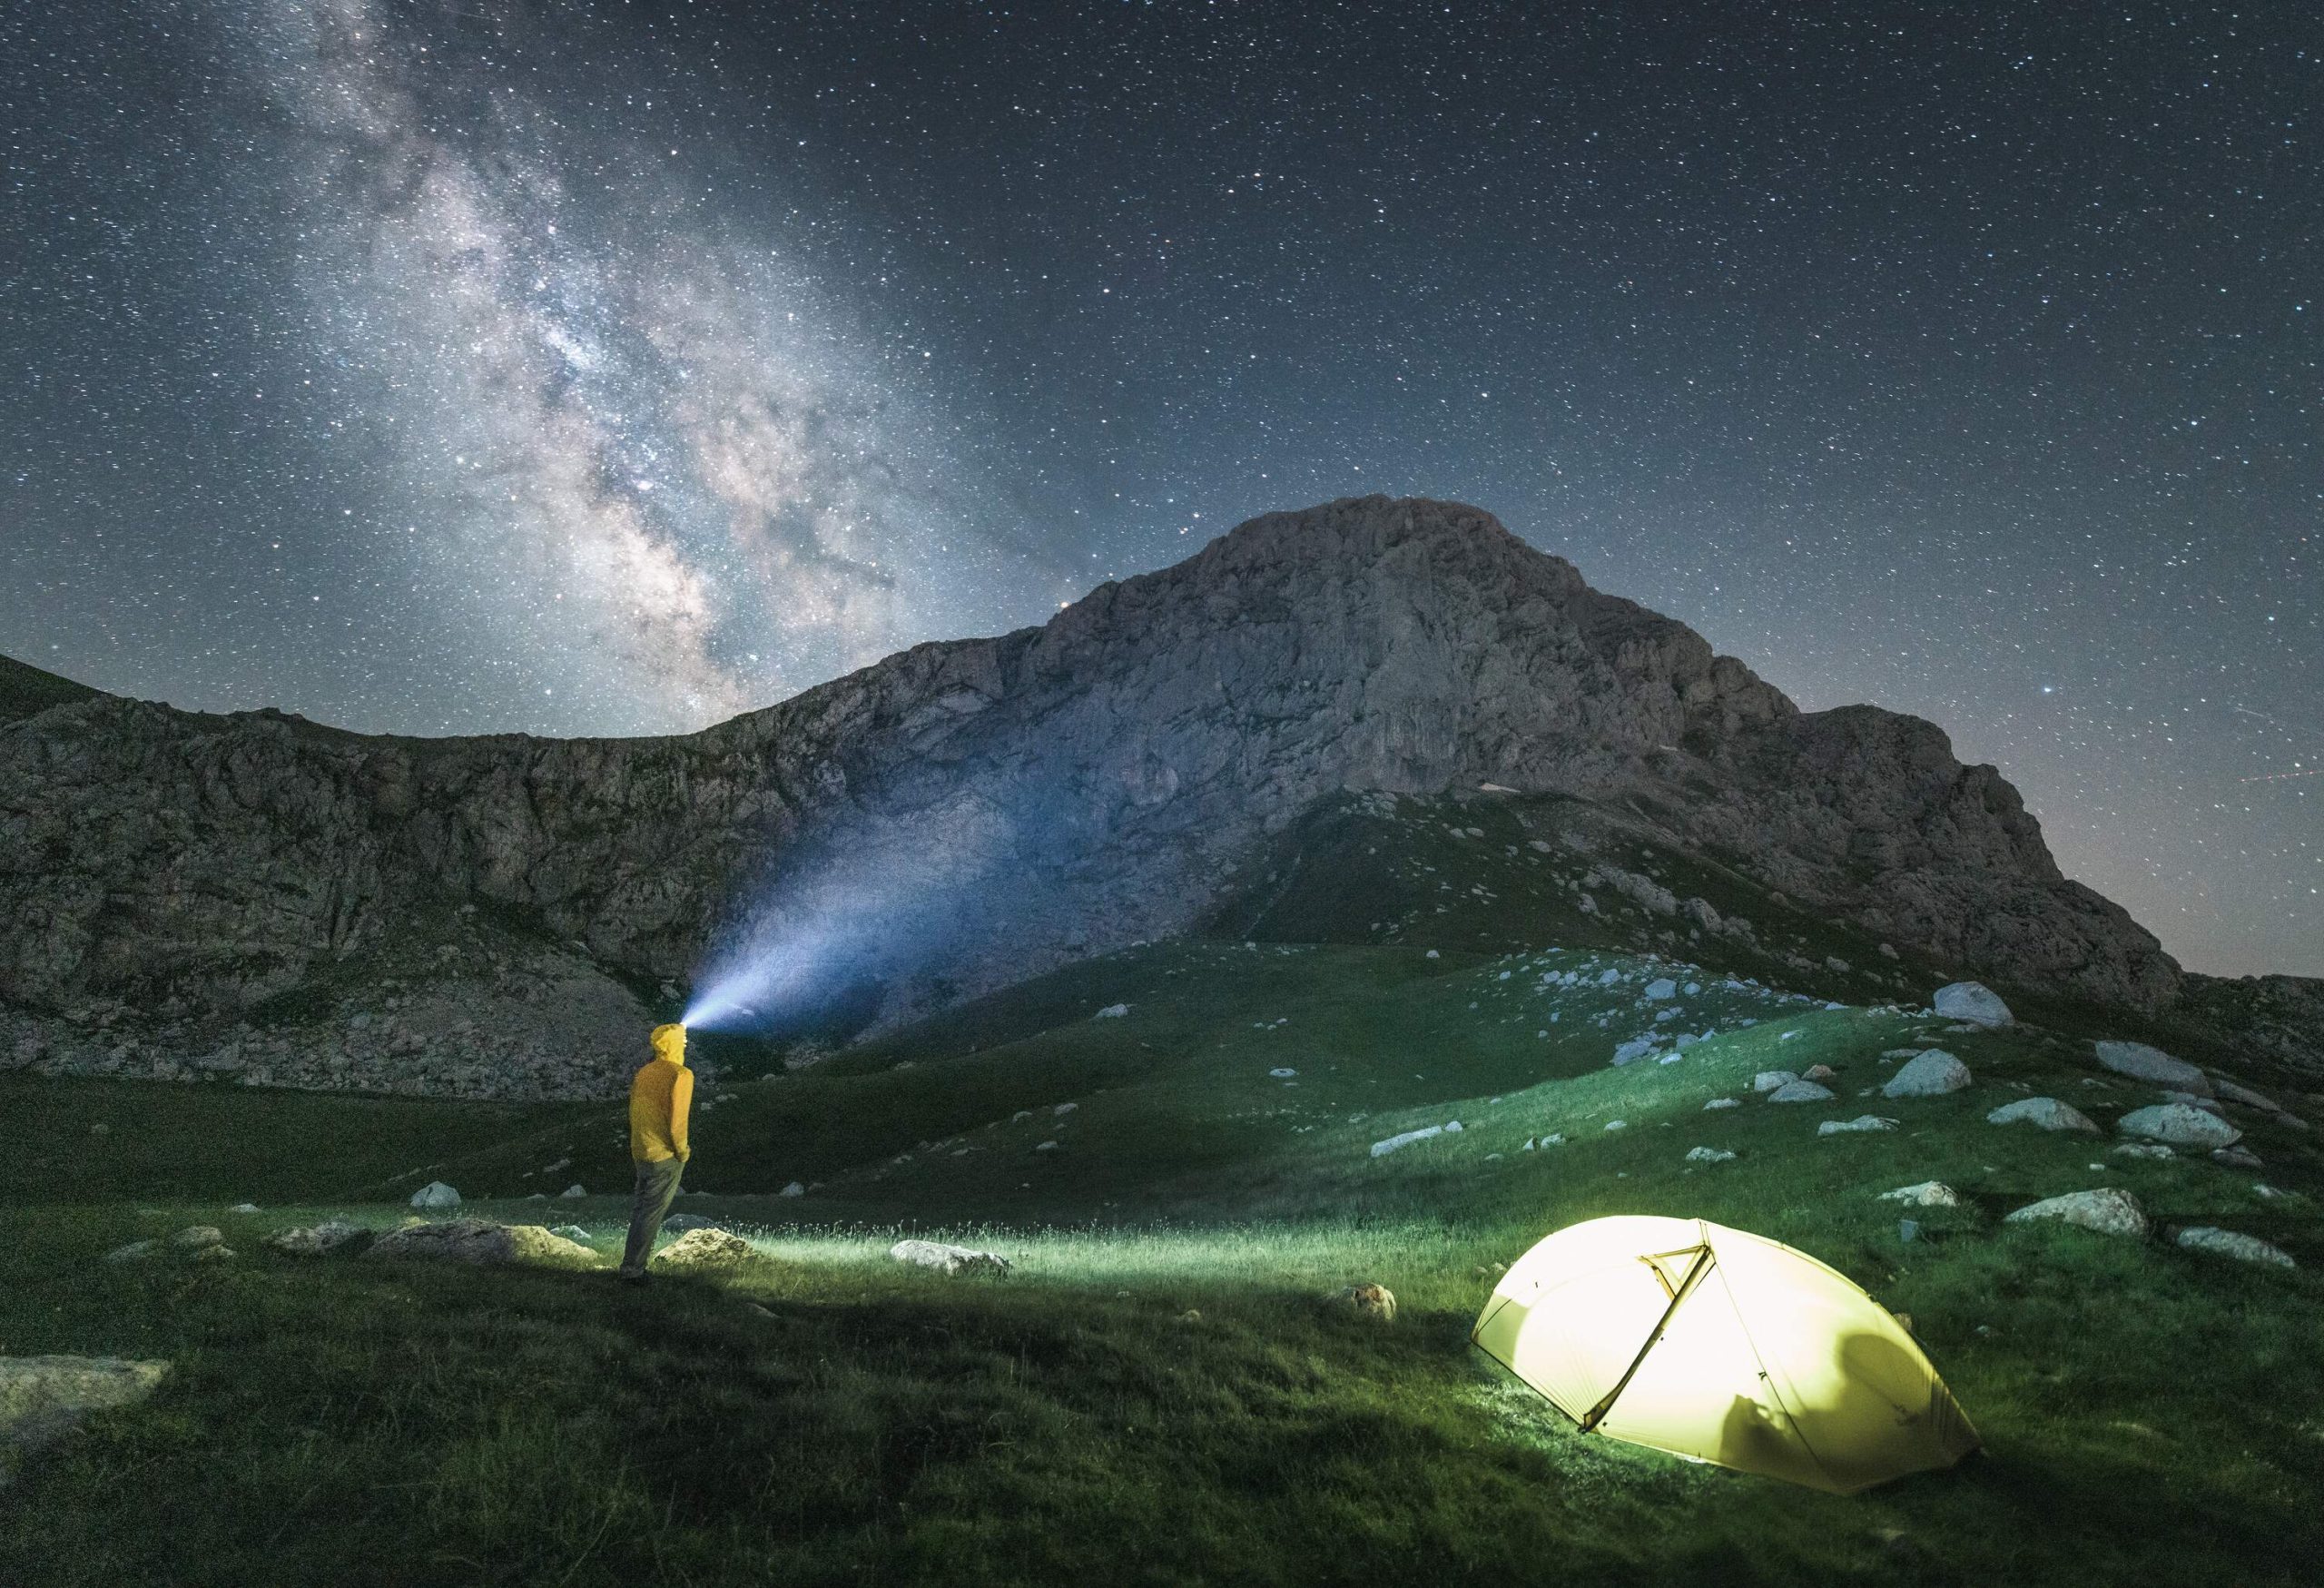 dest_greece_phocis_mount-giona_theme_camping_stargazing_gettyimages-1263577358_universal_within-usage-period_93101